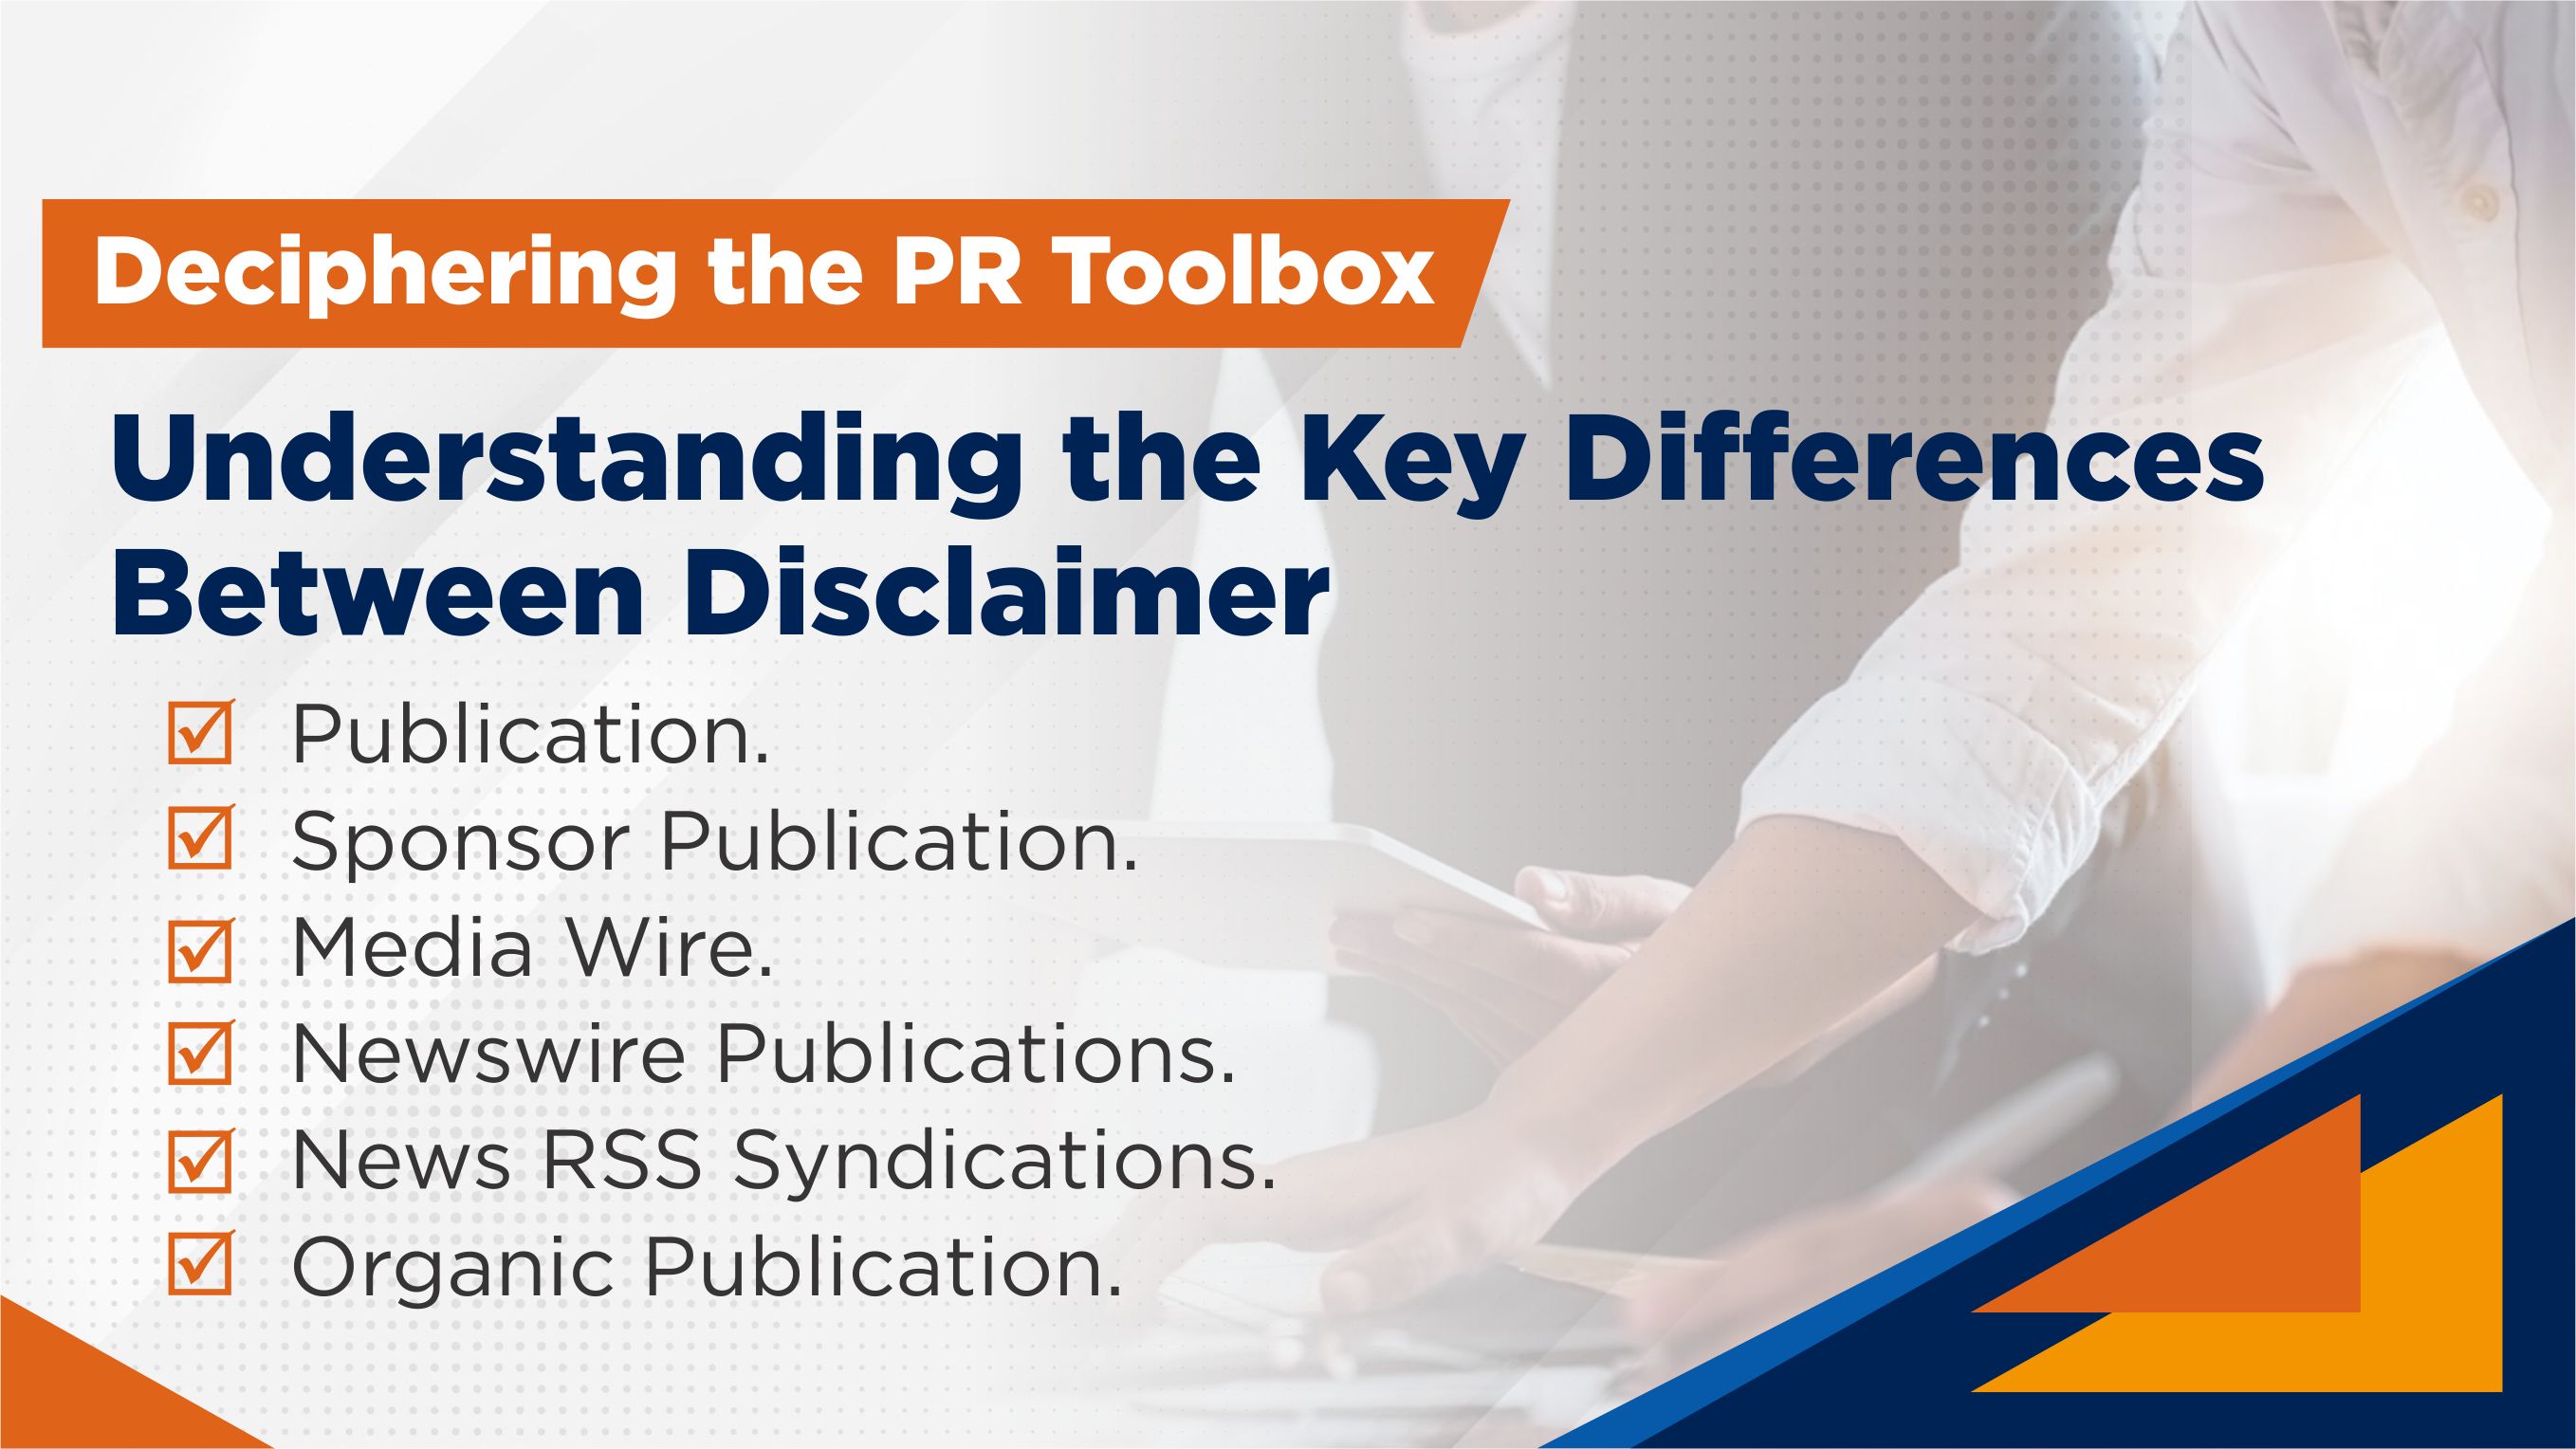 Deciphering the PR Toolbox: Understanding the Key Differences Between Disclaimer